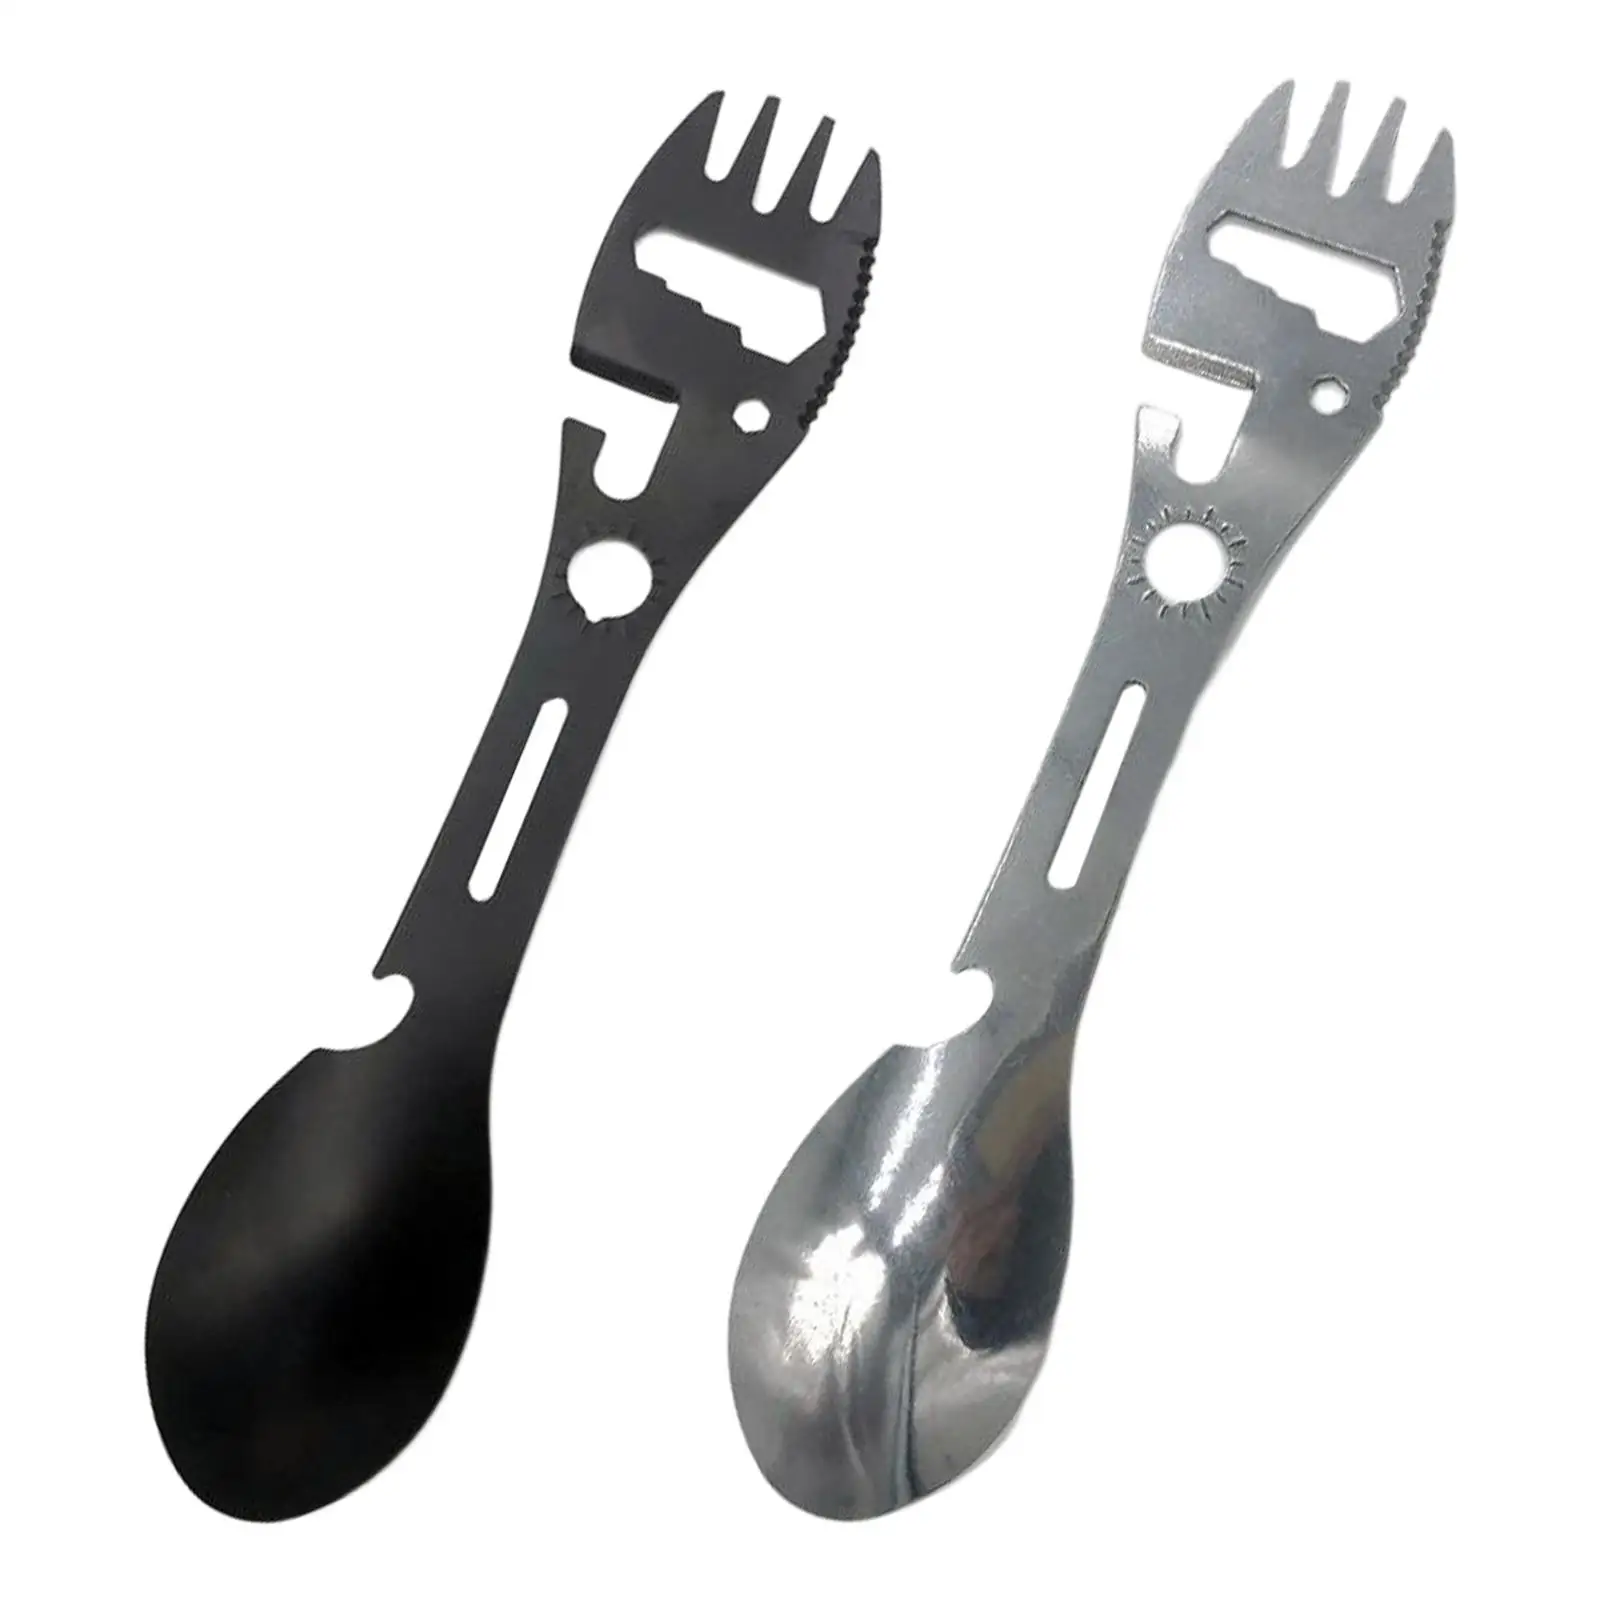 Portable Spork Fork Spoon Can Opener Dinnerware Stainless Steel Functional Tableware for Camping Travel Cooking Hiking Picnic